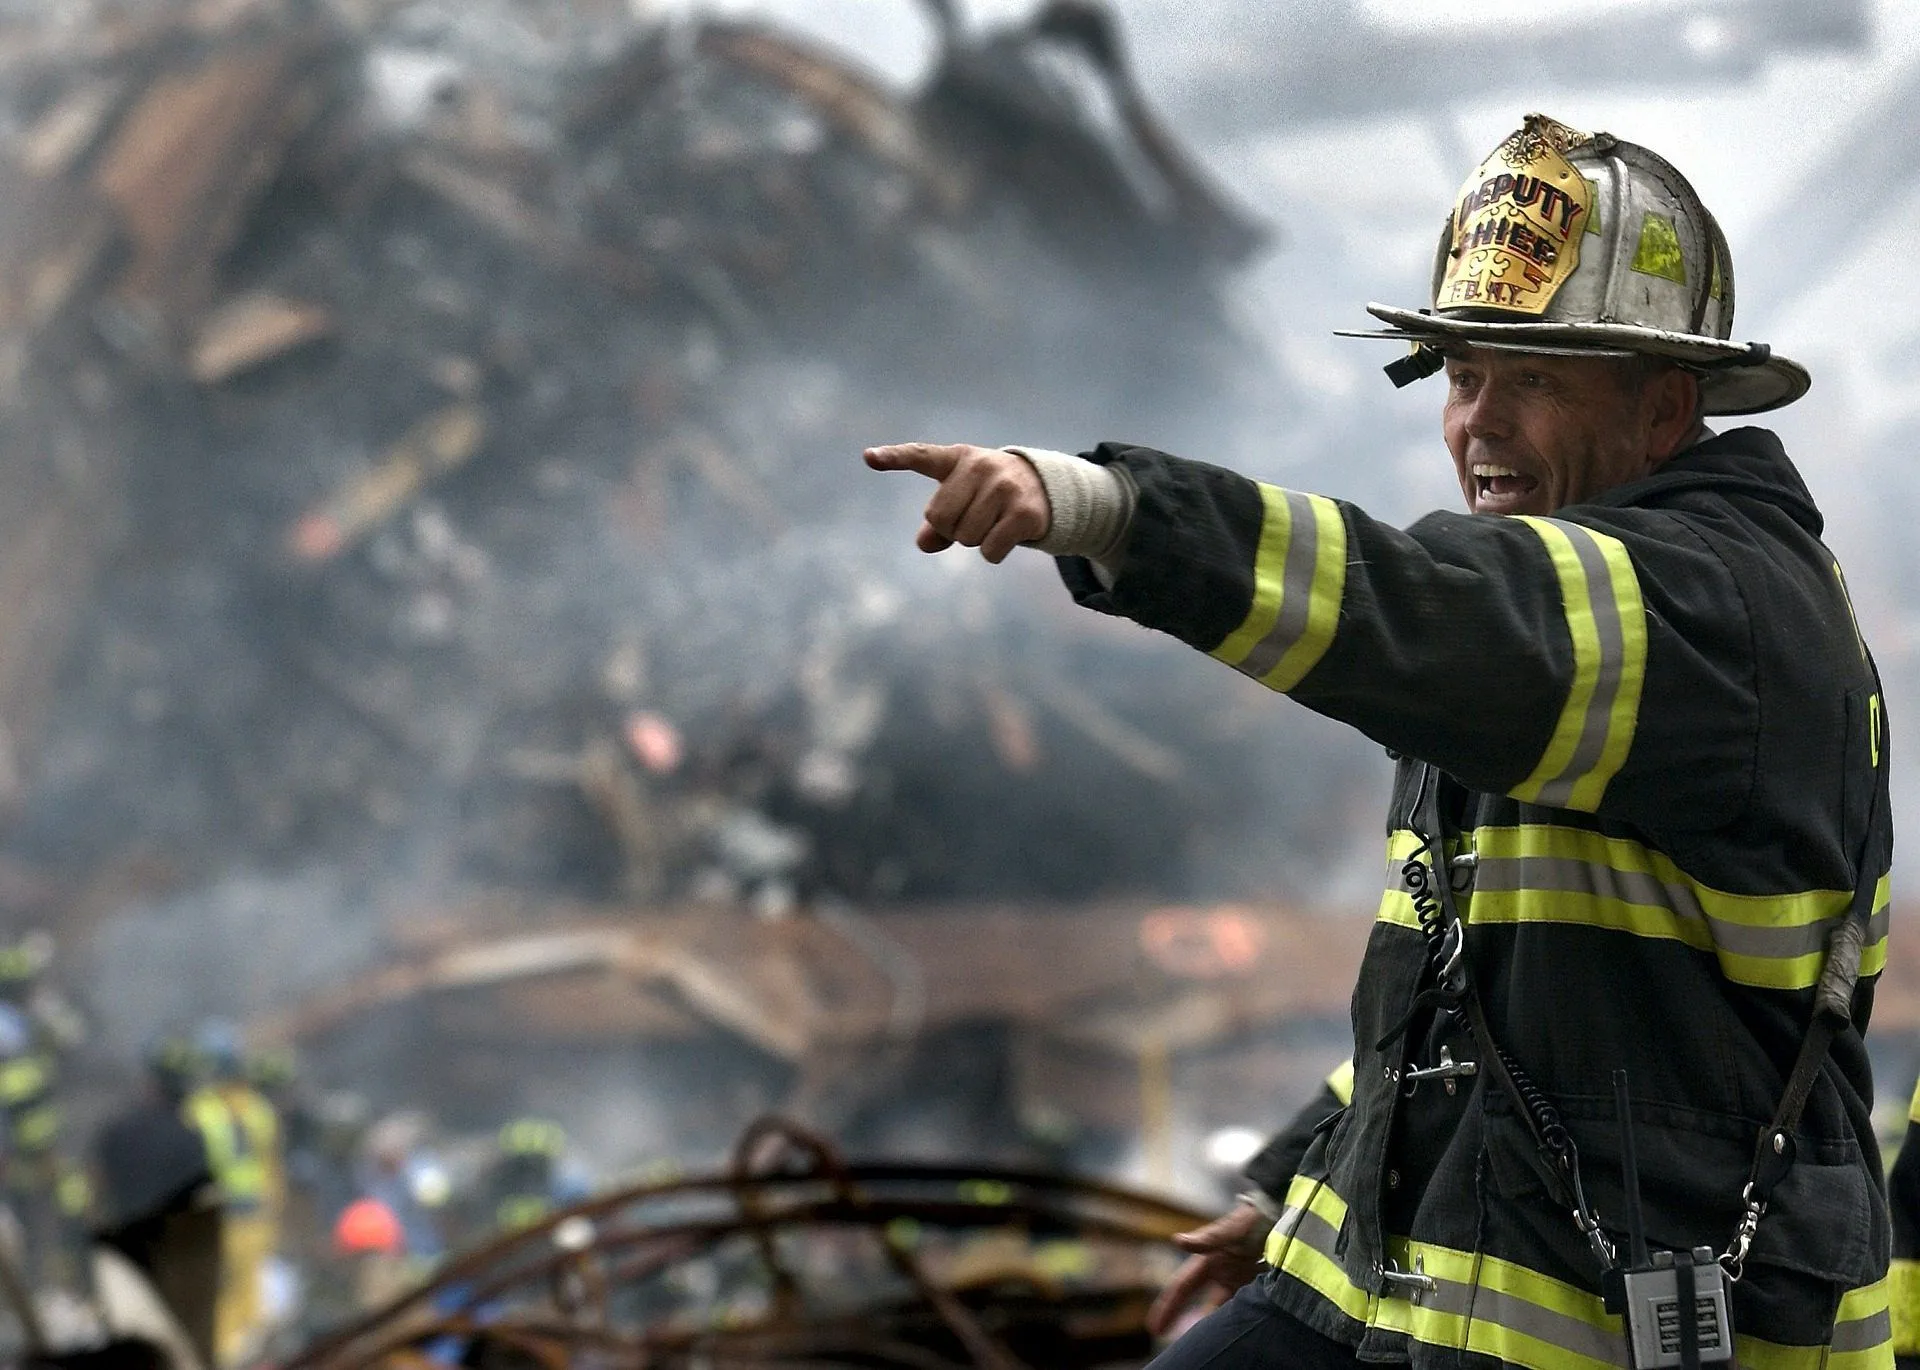 9/11 Responders and Survivors Still Plagued By Health Effects 20 Years Later